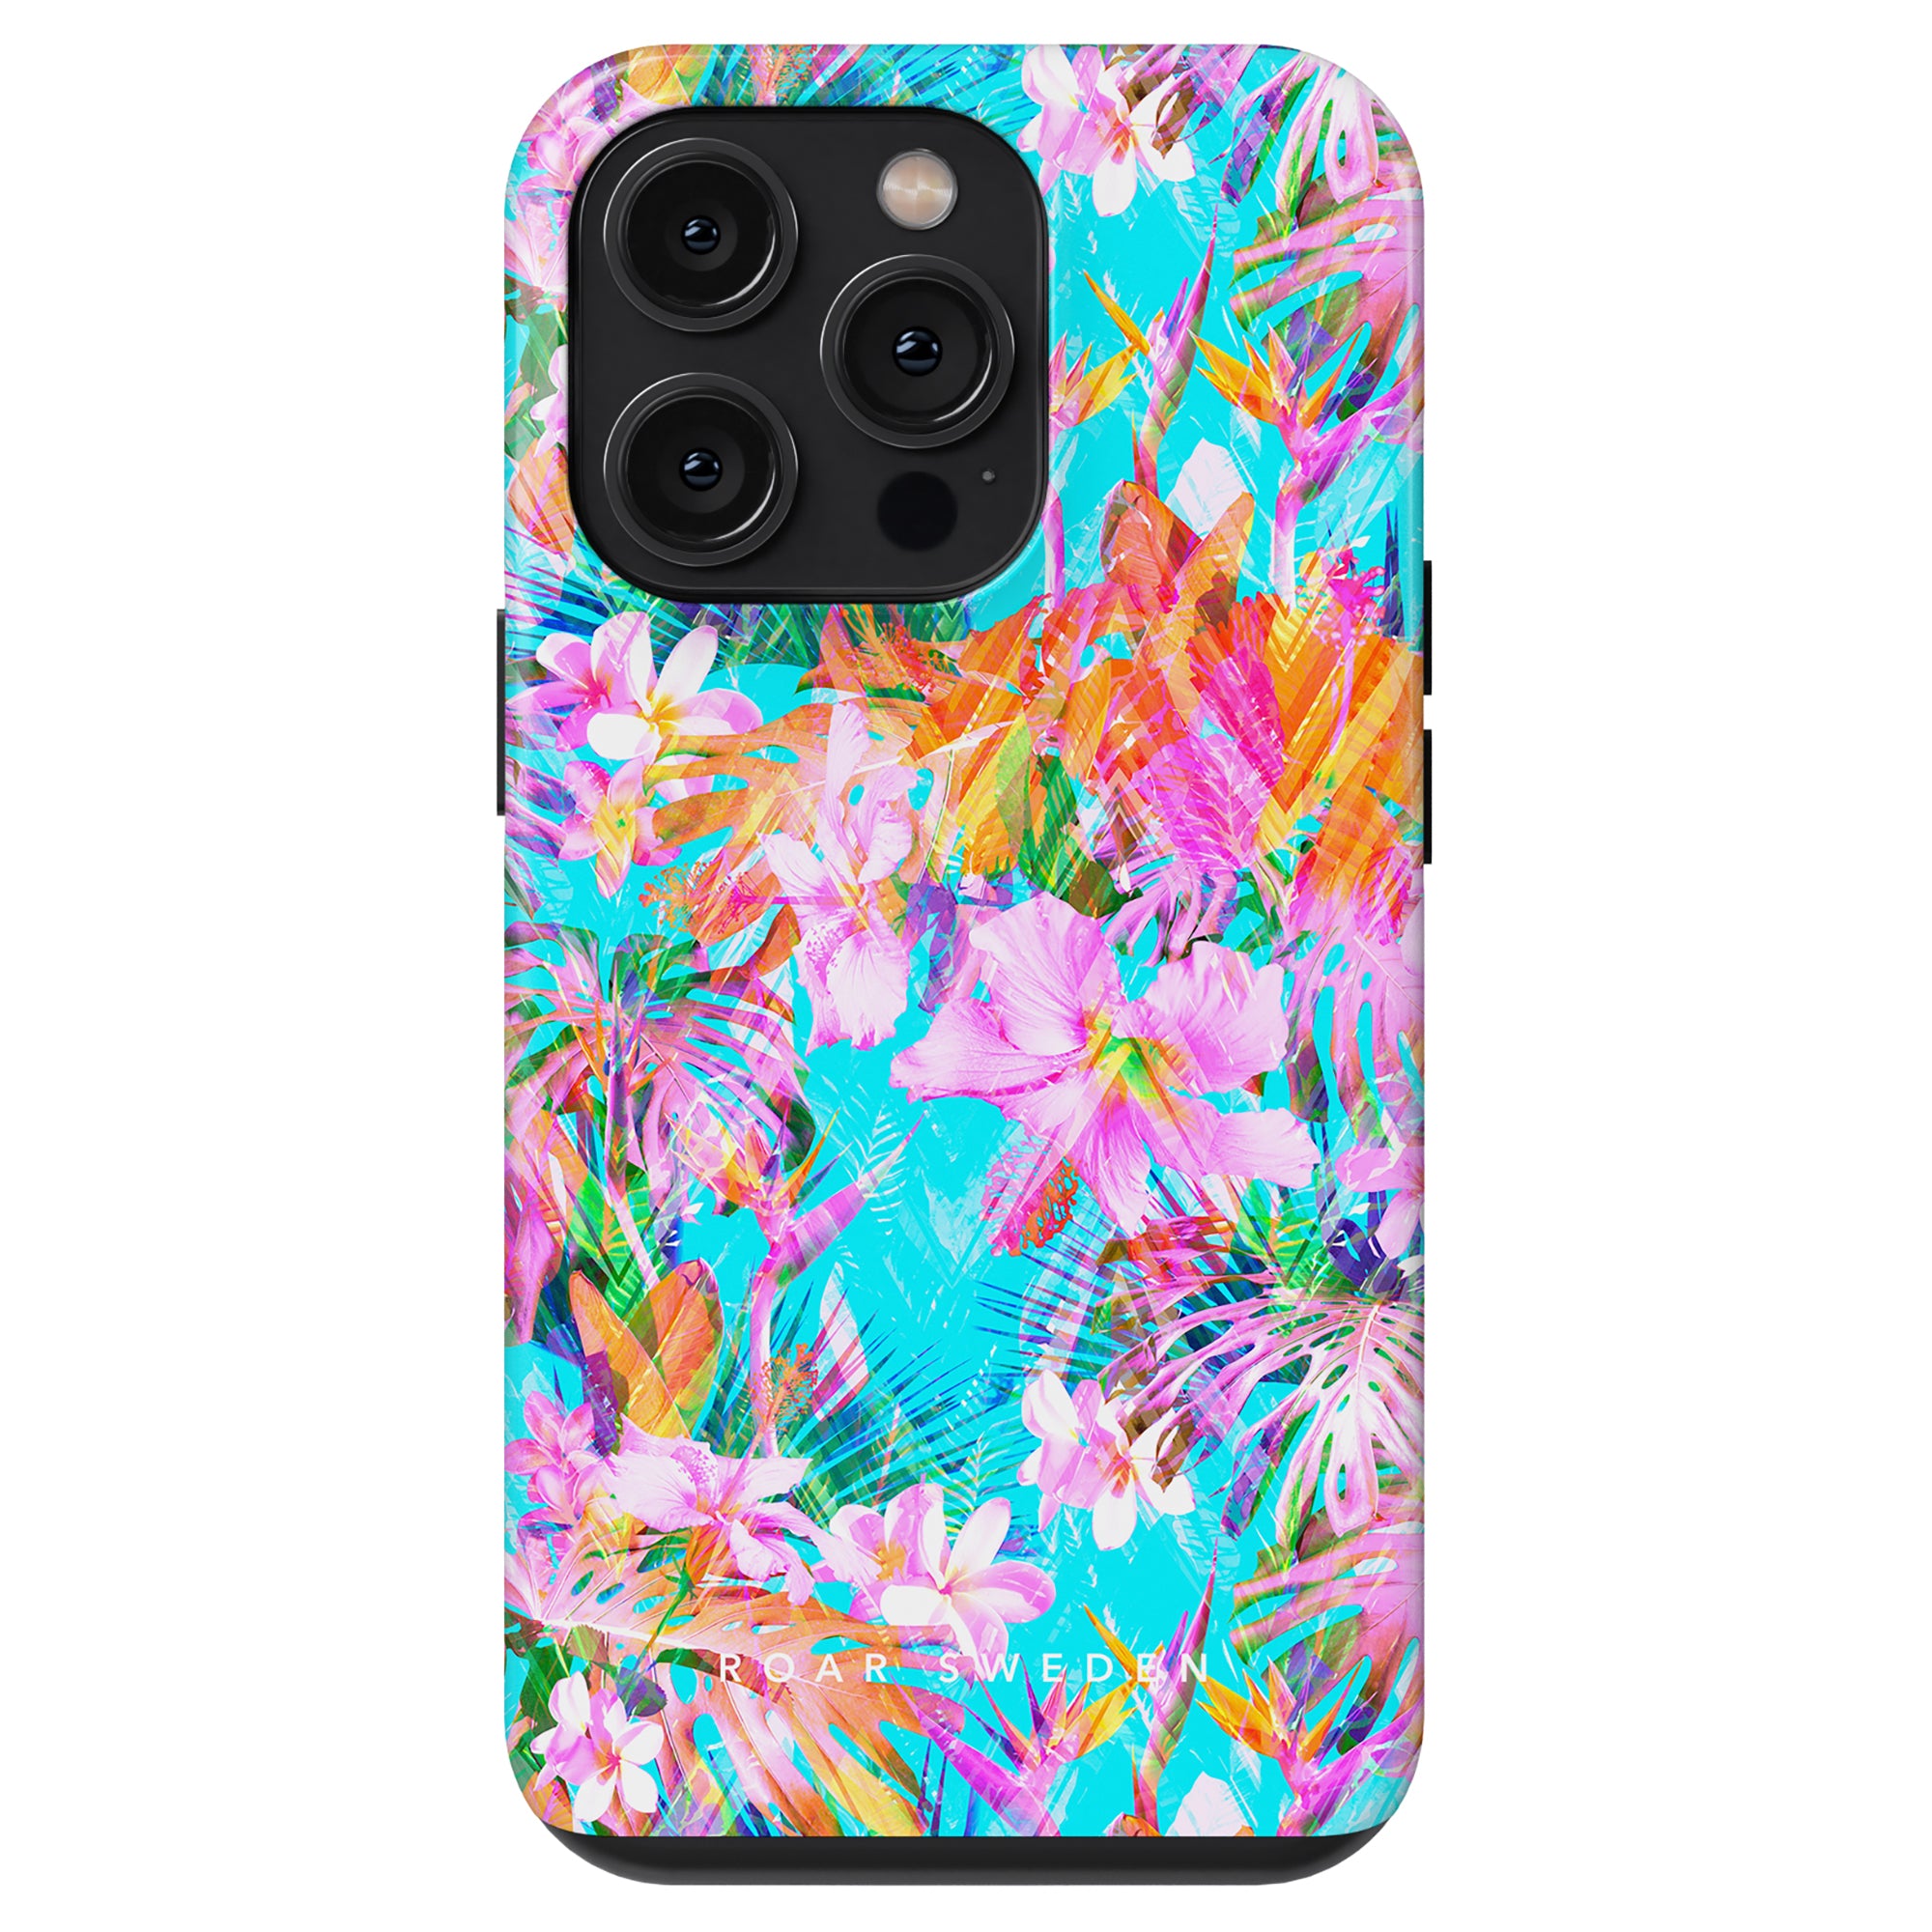 A Summer Burst - Tough case with tropical flowers (blommönster) on it, perfect for your iPhone 11 (mobilskal).